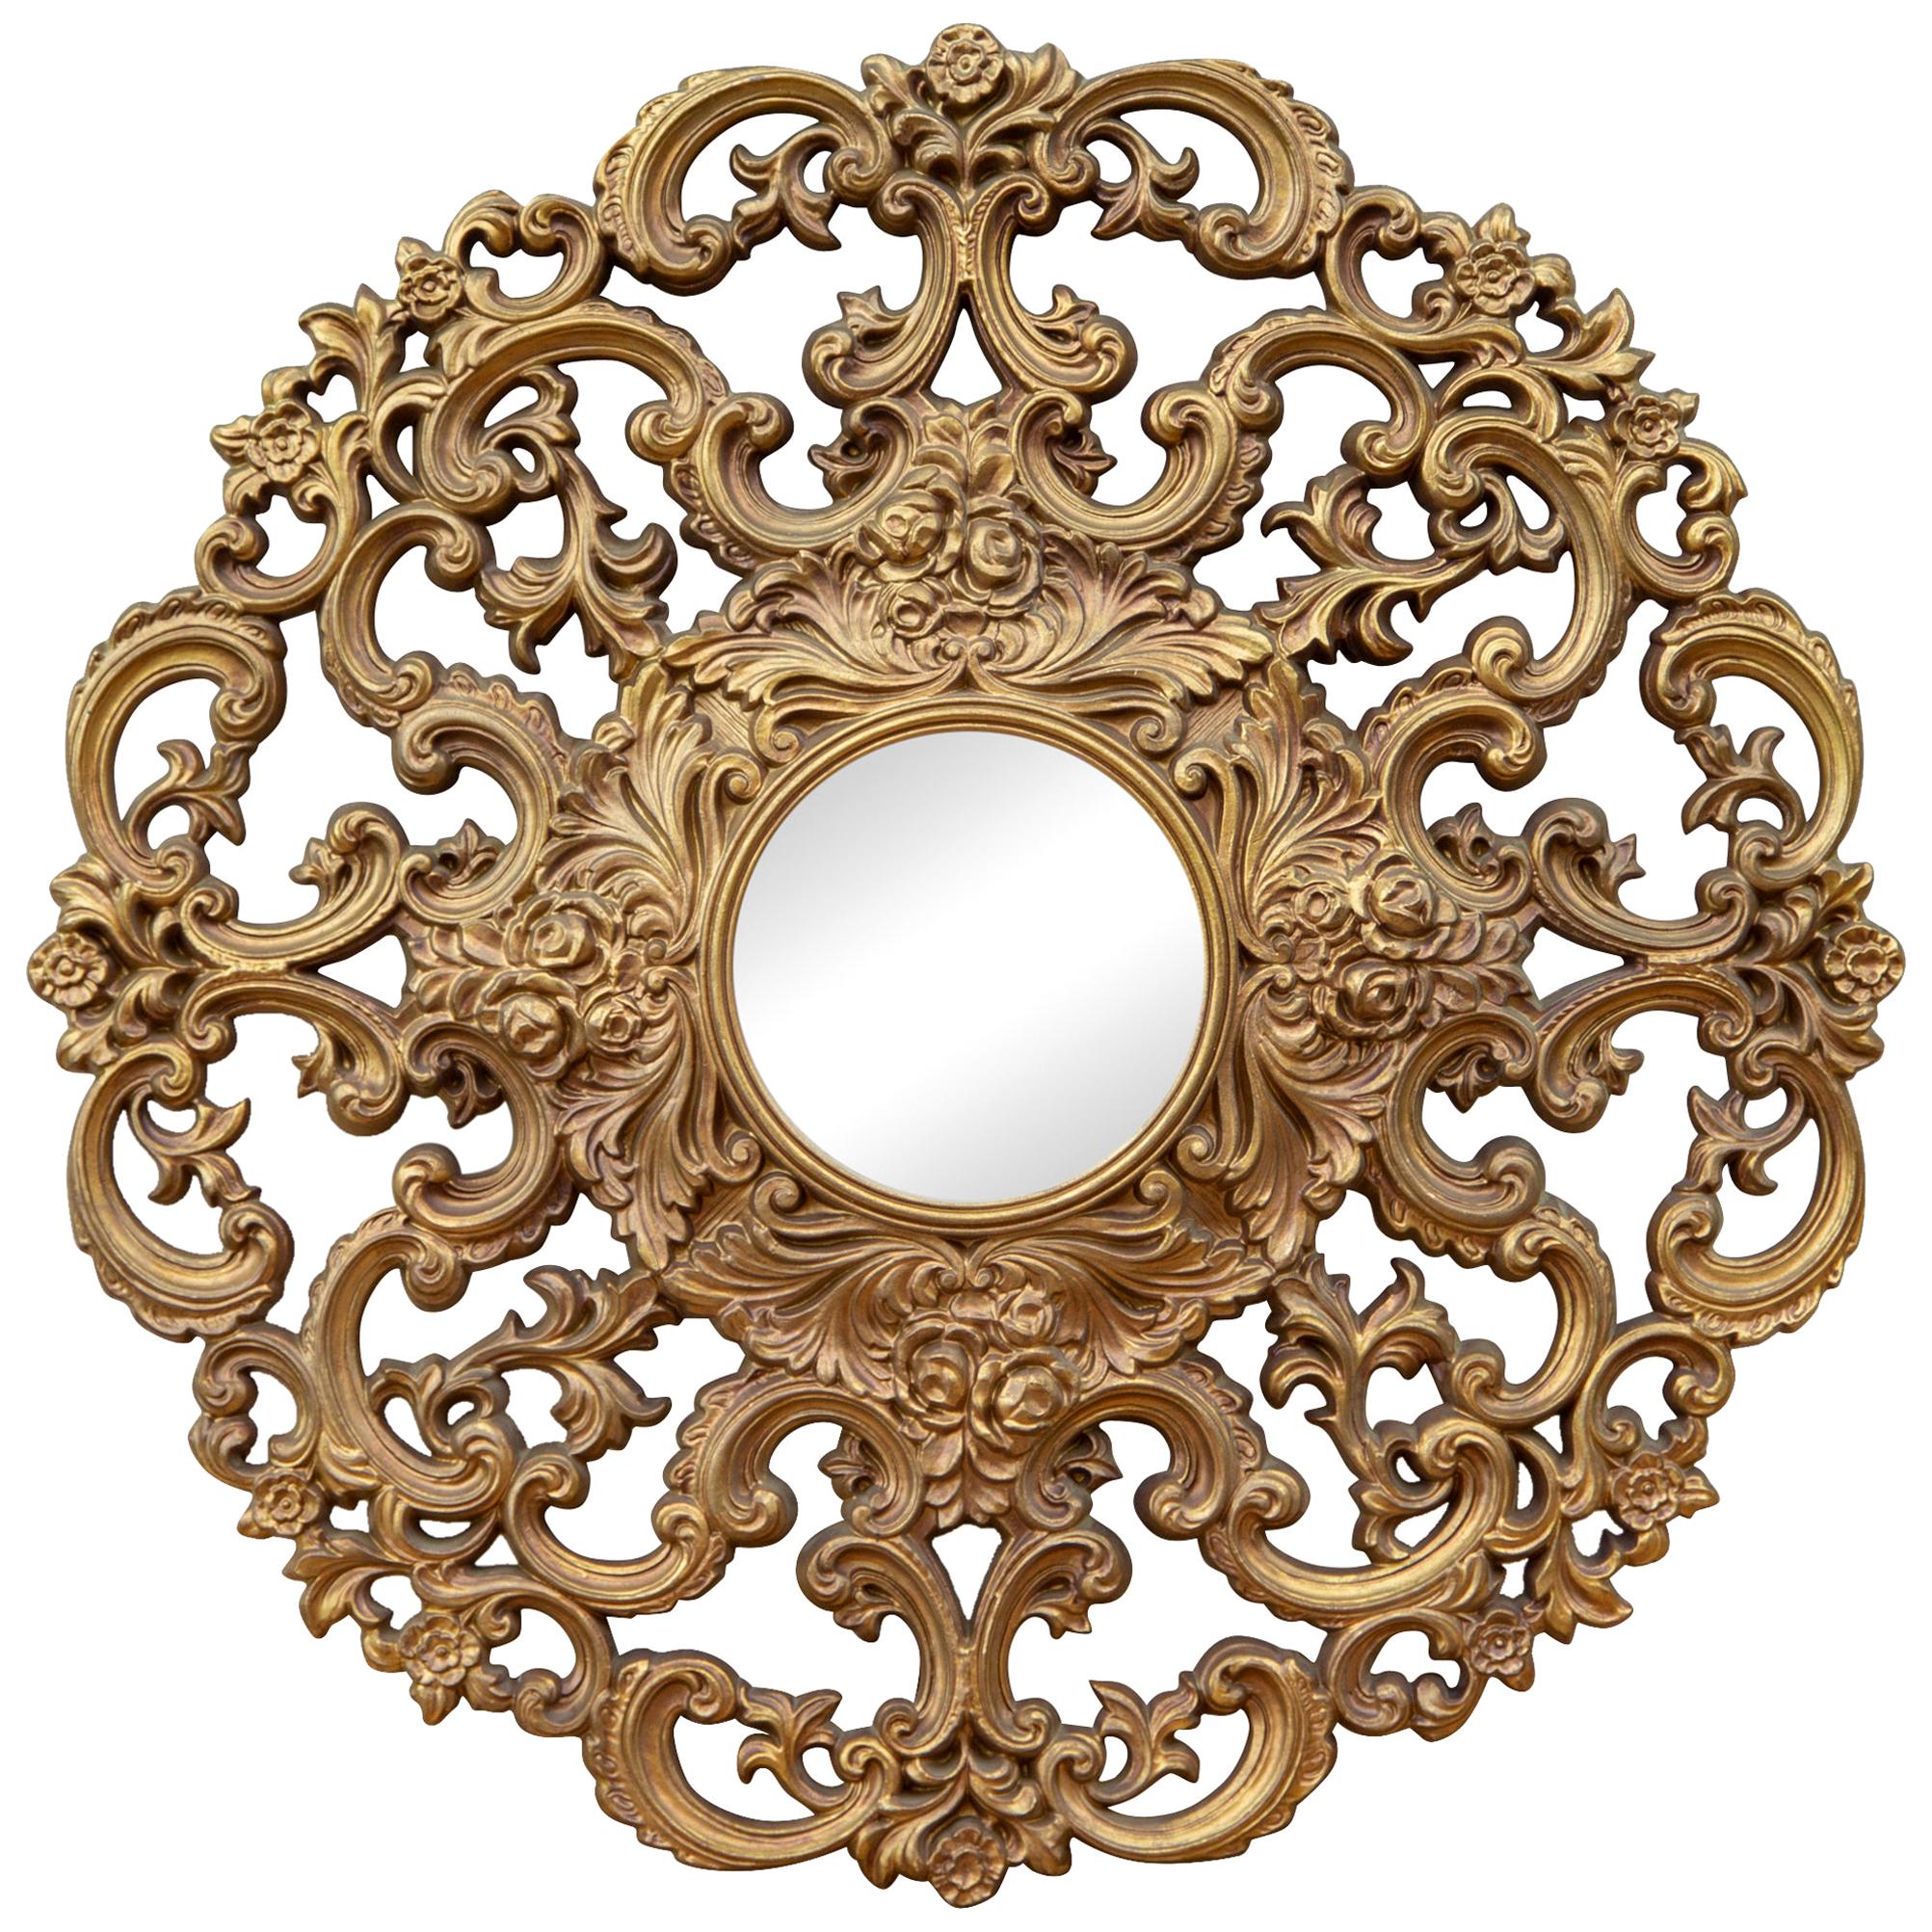 1960s Large Baroque Style Gold Filigree Round Mirror